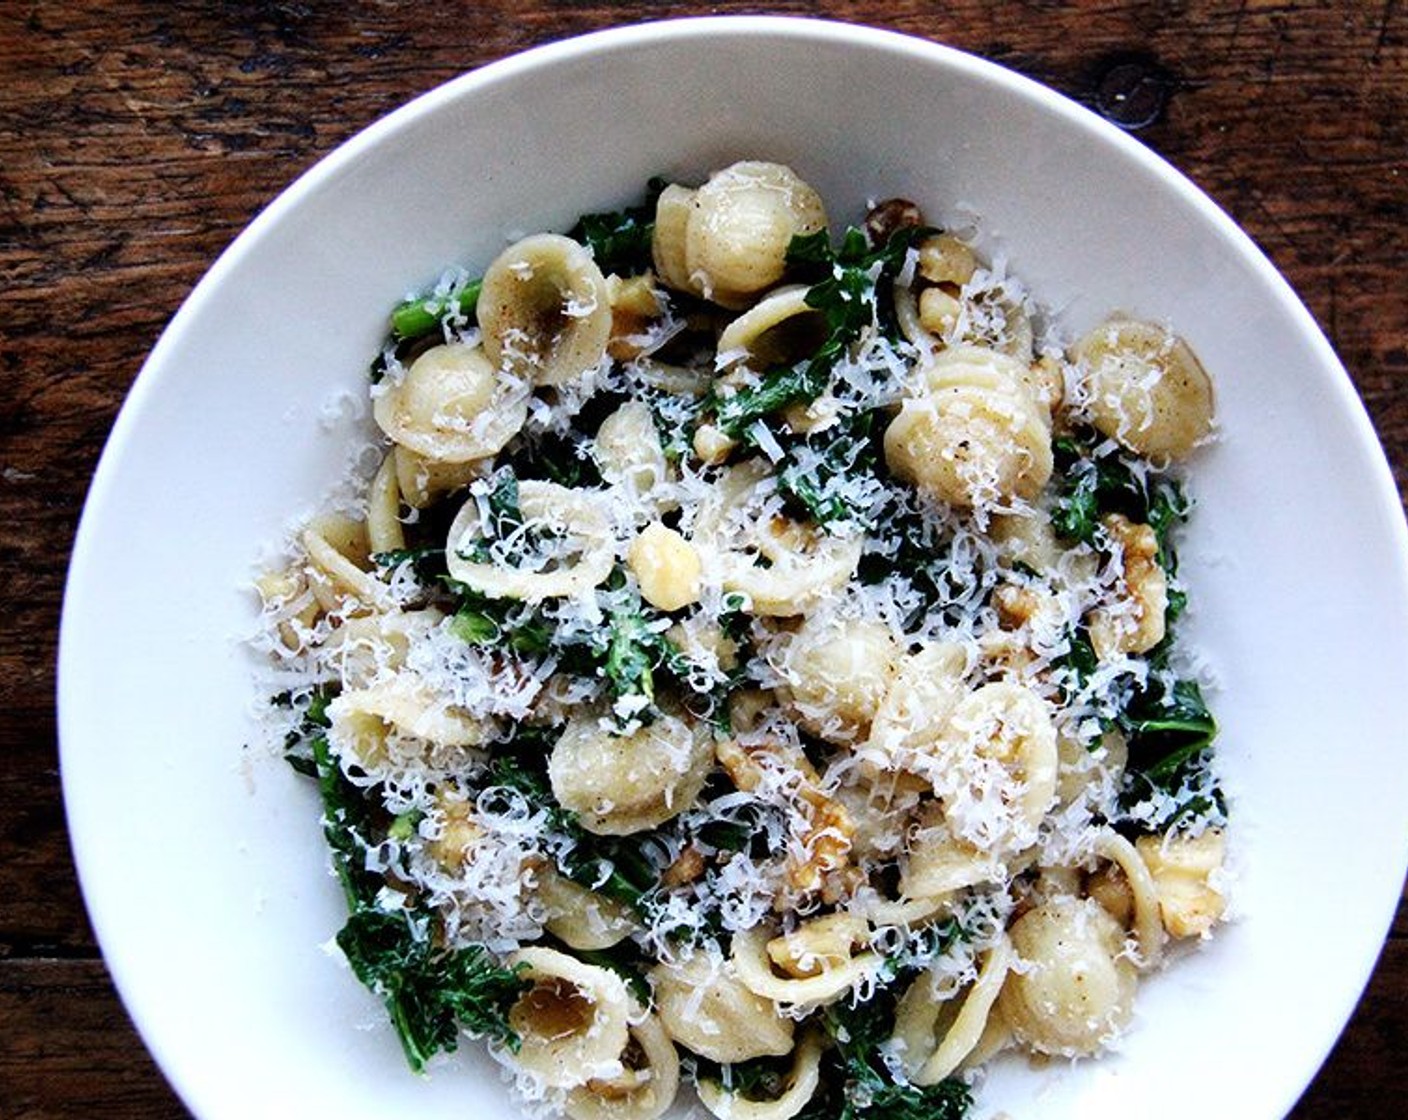 Orecchiette with Brown Butter, Swiss Chard, and Walnuts